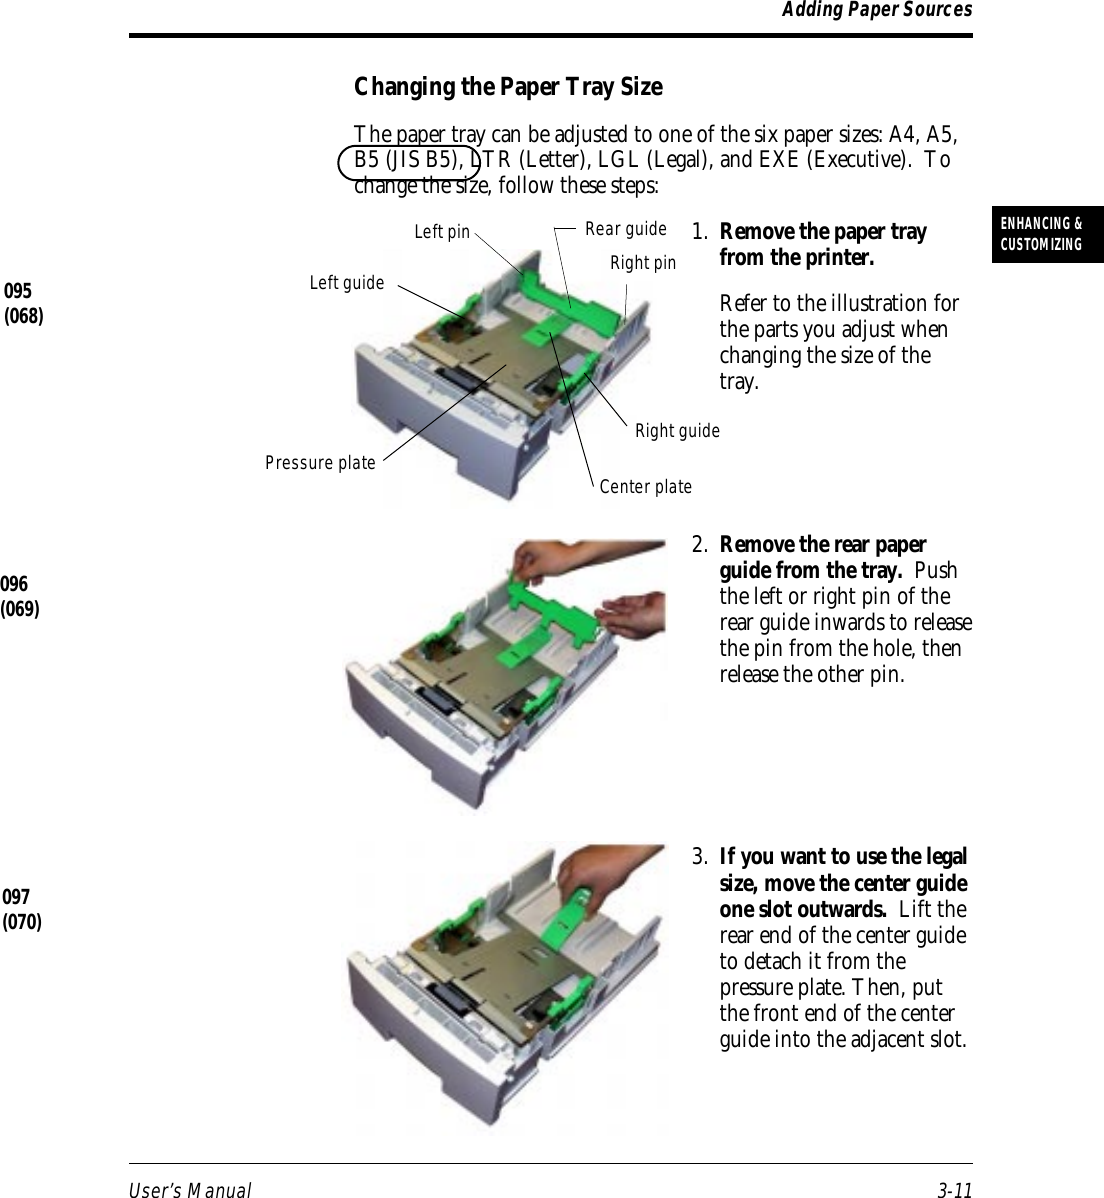 User’s Manual 3-11ENHANCING &amp;CUSTOMIZINGAdding Paper SourcesChanging the Paper Tray SizeThe paper tray can be adjusted to one of the six paper sizes: A4, A5,B5 (JIS B5), LTR (Letter), LGL (Legal), and EXE (Executive).  Tochange the size, follow these steps:1. Remove the paper trayfrom the printer.Refer to the illustration forthe parts you adjust whenchanging the size of thetray.2. Remove the rear paperguide from the tray.  Pushthe left or right pin of therear guide inwards to releasethe pin from the hole, thenrelease the other pin.3. If you want to use the legalsize, move the center guideone slot outwards.  Lift therear end of the center guideto detach it from thepressure plate. Then, putthe front end of the centerguide into the adjacent slot.095(068)Left pin Rear guideRight pinRight guideLeft guideCenter platePressure plate096(069)097(070)